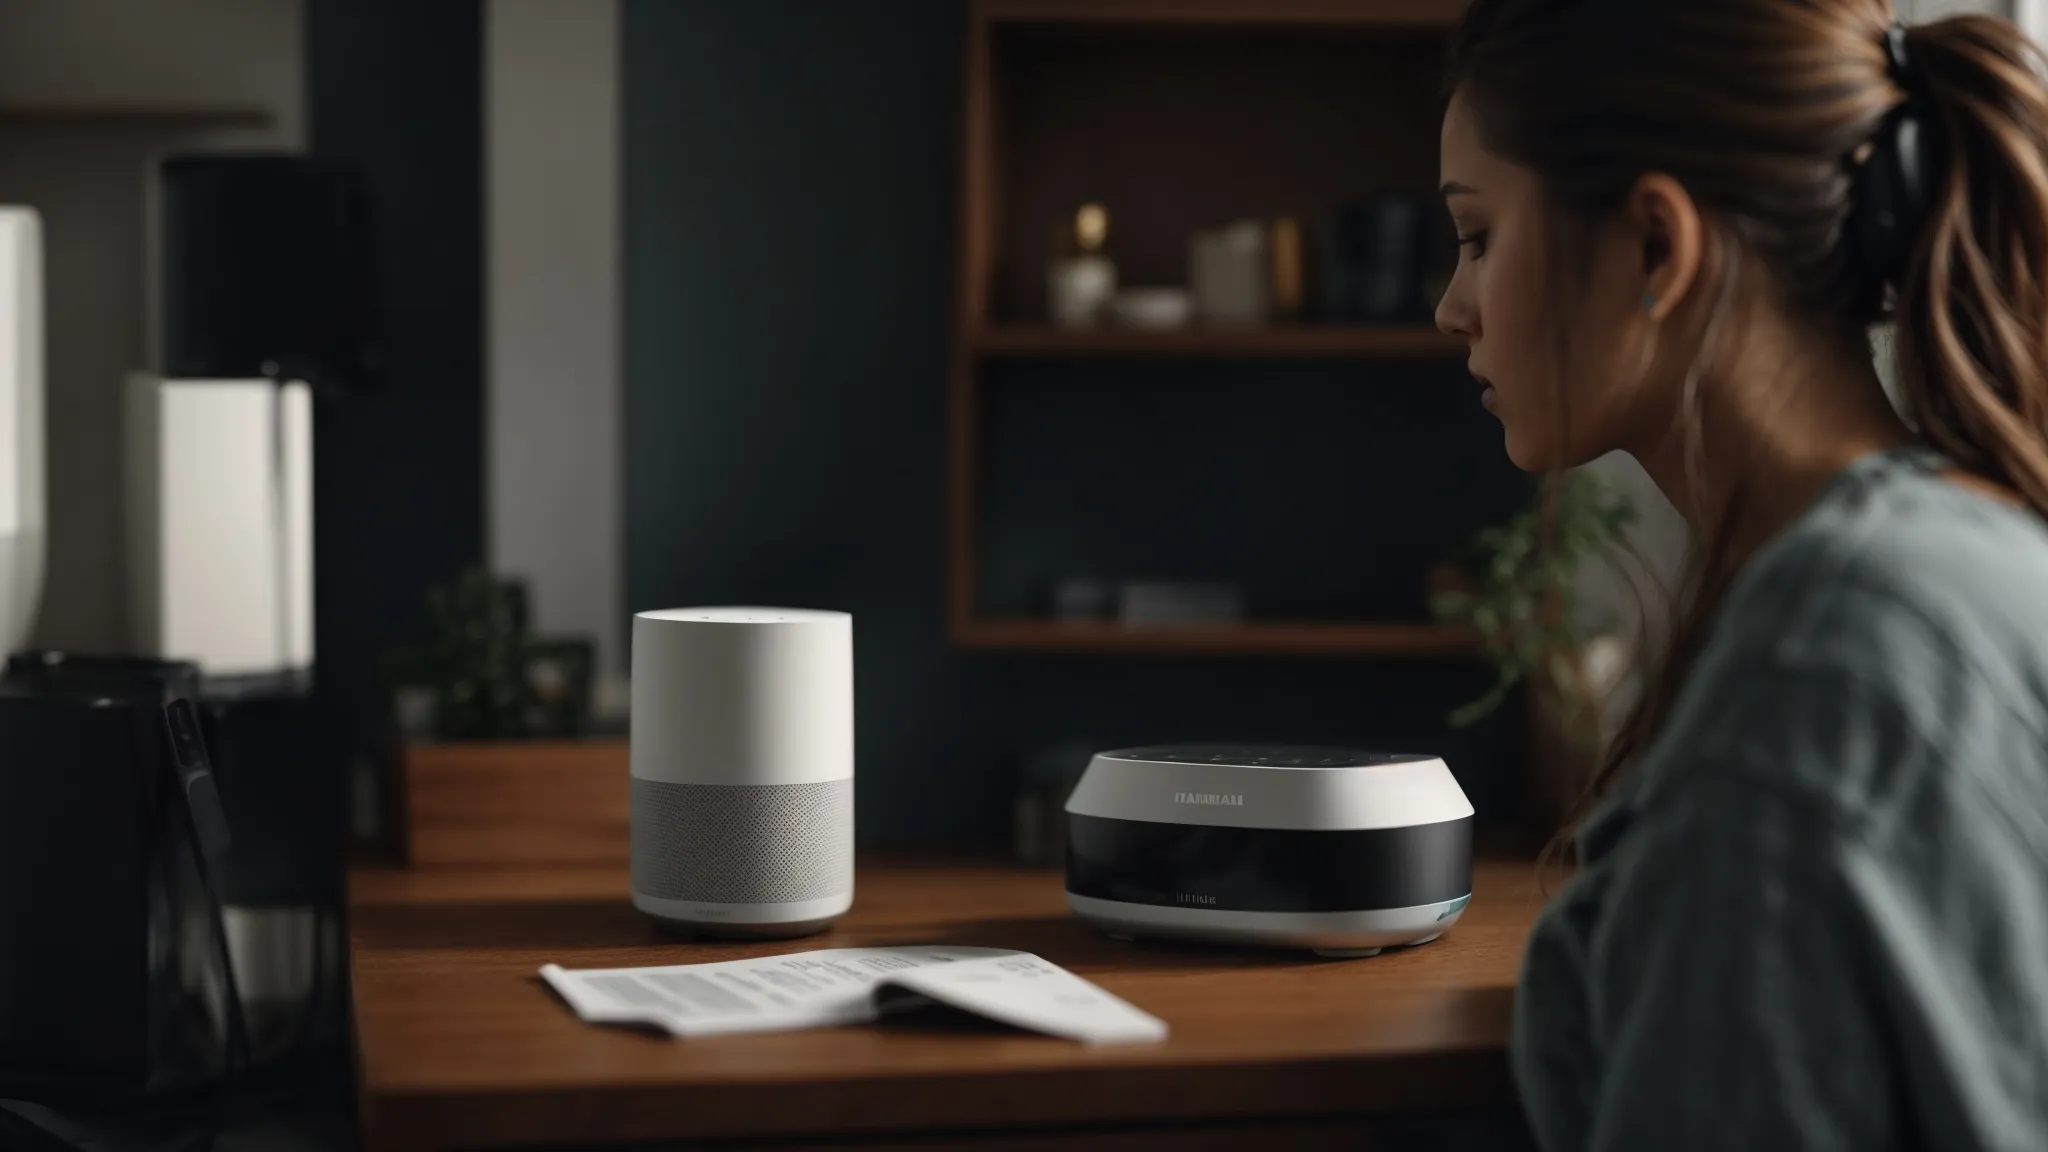 a person speaks to a smart speaker that sits on a modern home desk setup, while exploring the potential of voice commands.